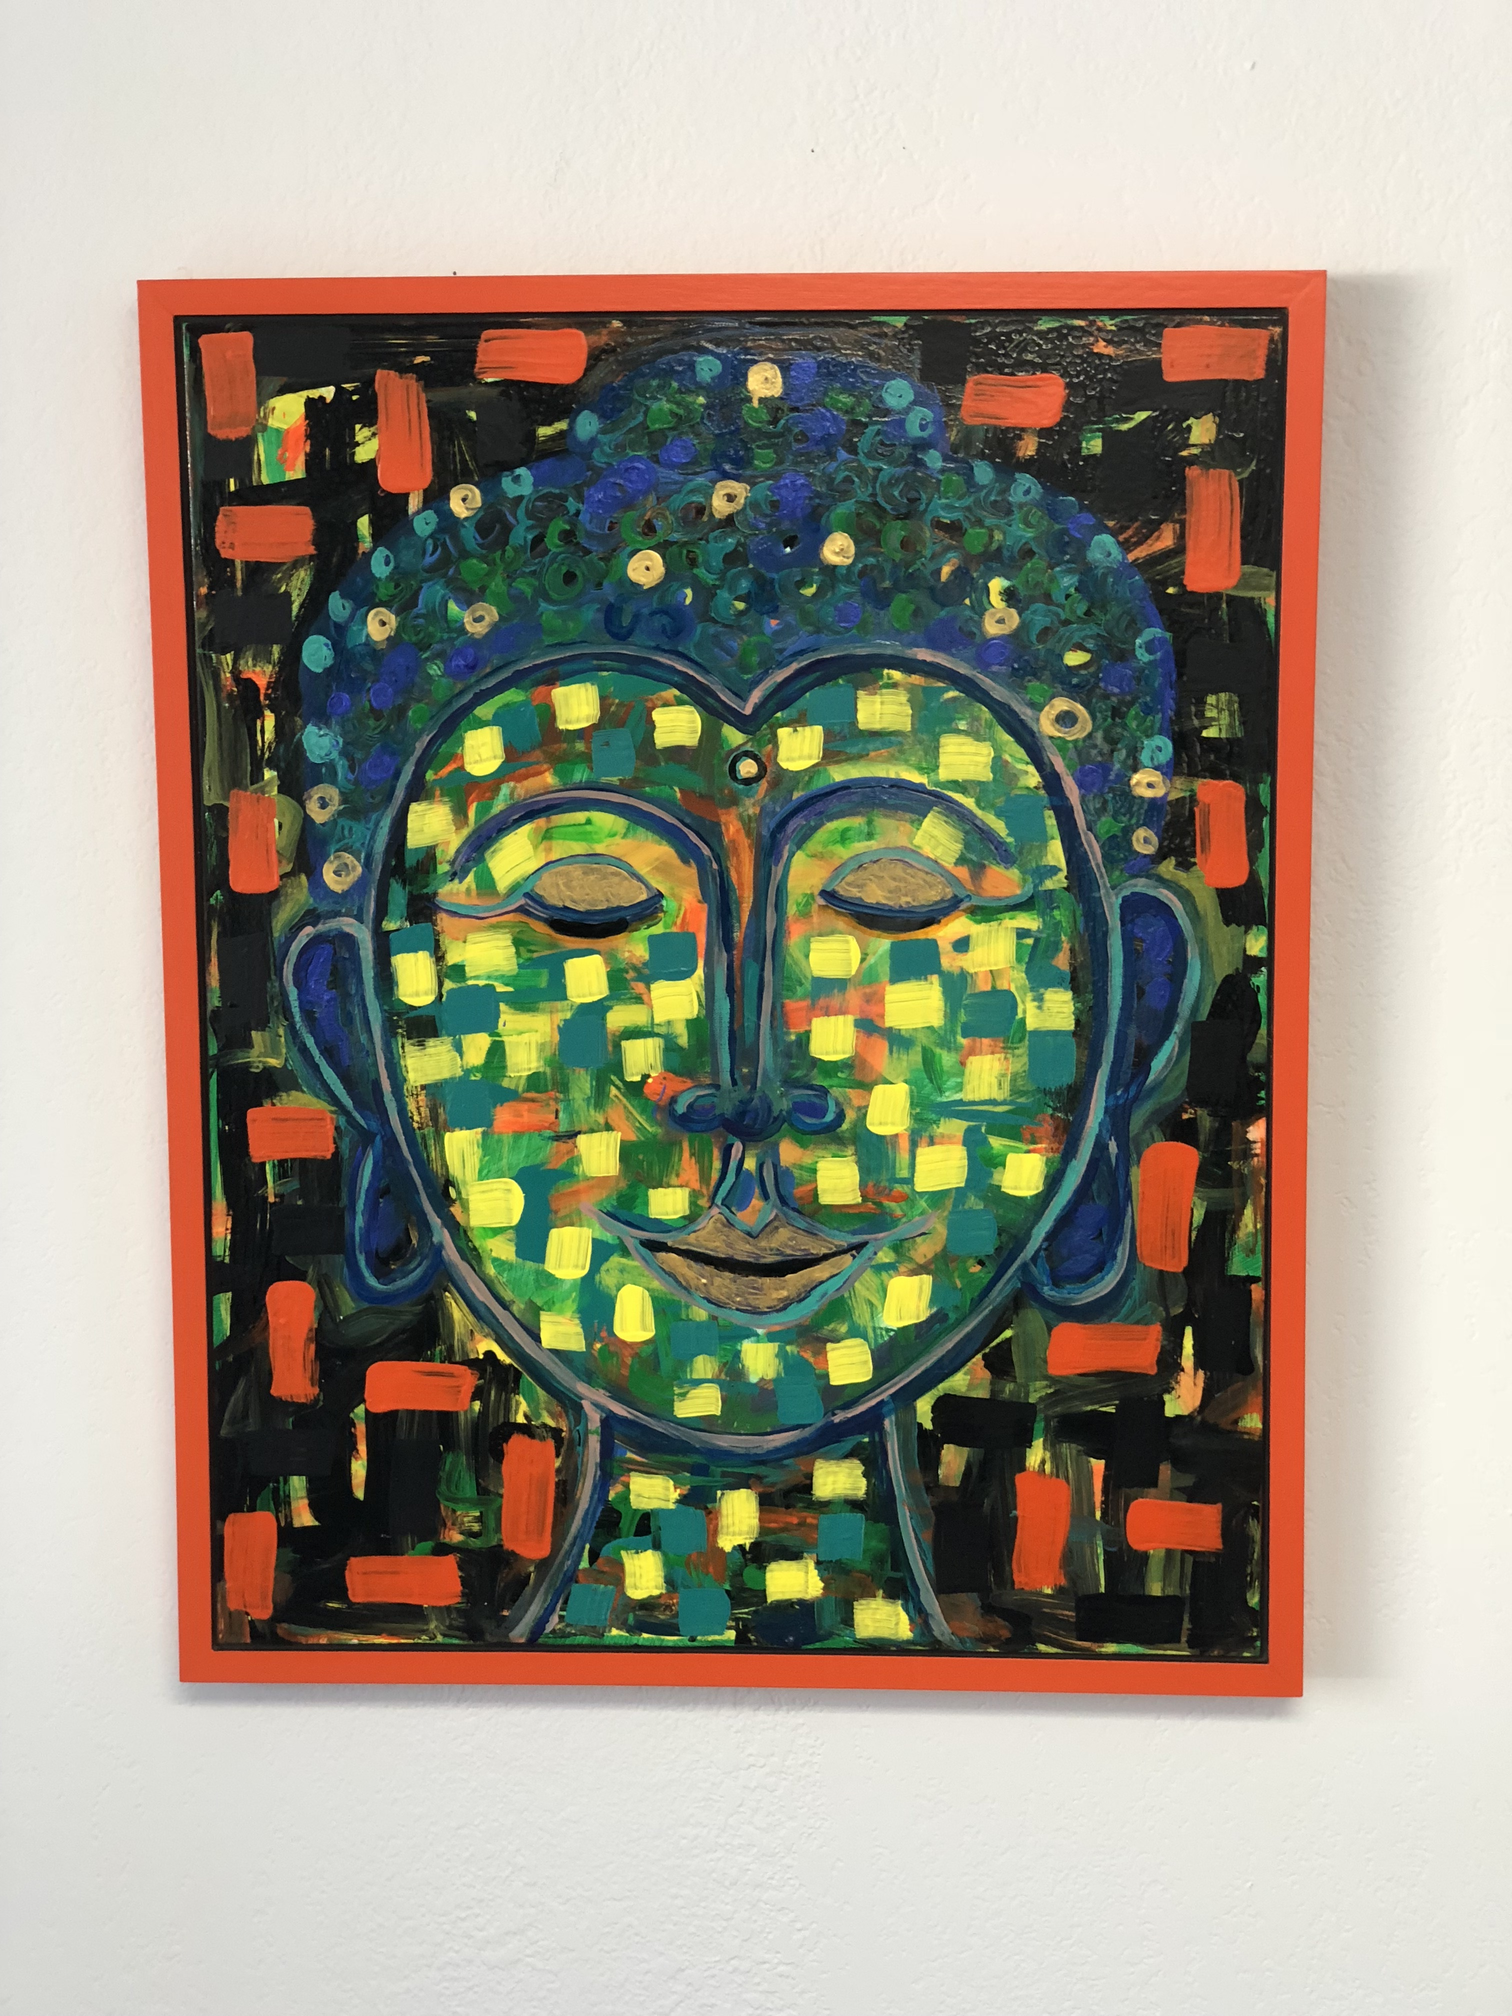 Glimmer  Acrylic on Canvas  Artwork -  24” x 30”  Overall – 25 ½” x 31 ½”  Contemporary Artist Lisa Watts is known for her colorful works featured at art festivals, shows and galleries throughout California.  This piece, Glimmer, features a Buddha style bust with splashes or electric orange, yellow, and blue.  Painted in 2017 exclusively for TooGays, it is signed on the back and mounted on canvas in a reclaimed wood frame.  Glimmer is Too likely to brighten up any space while bringing a smile to your face!